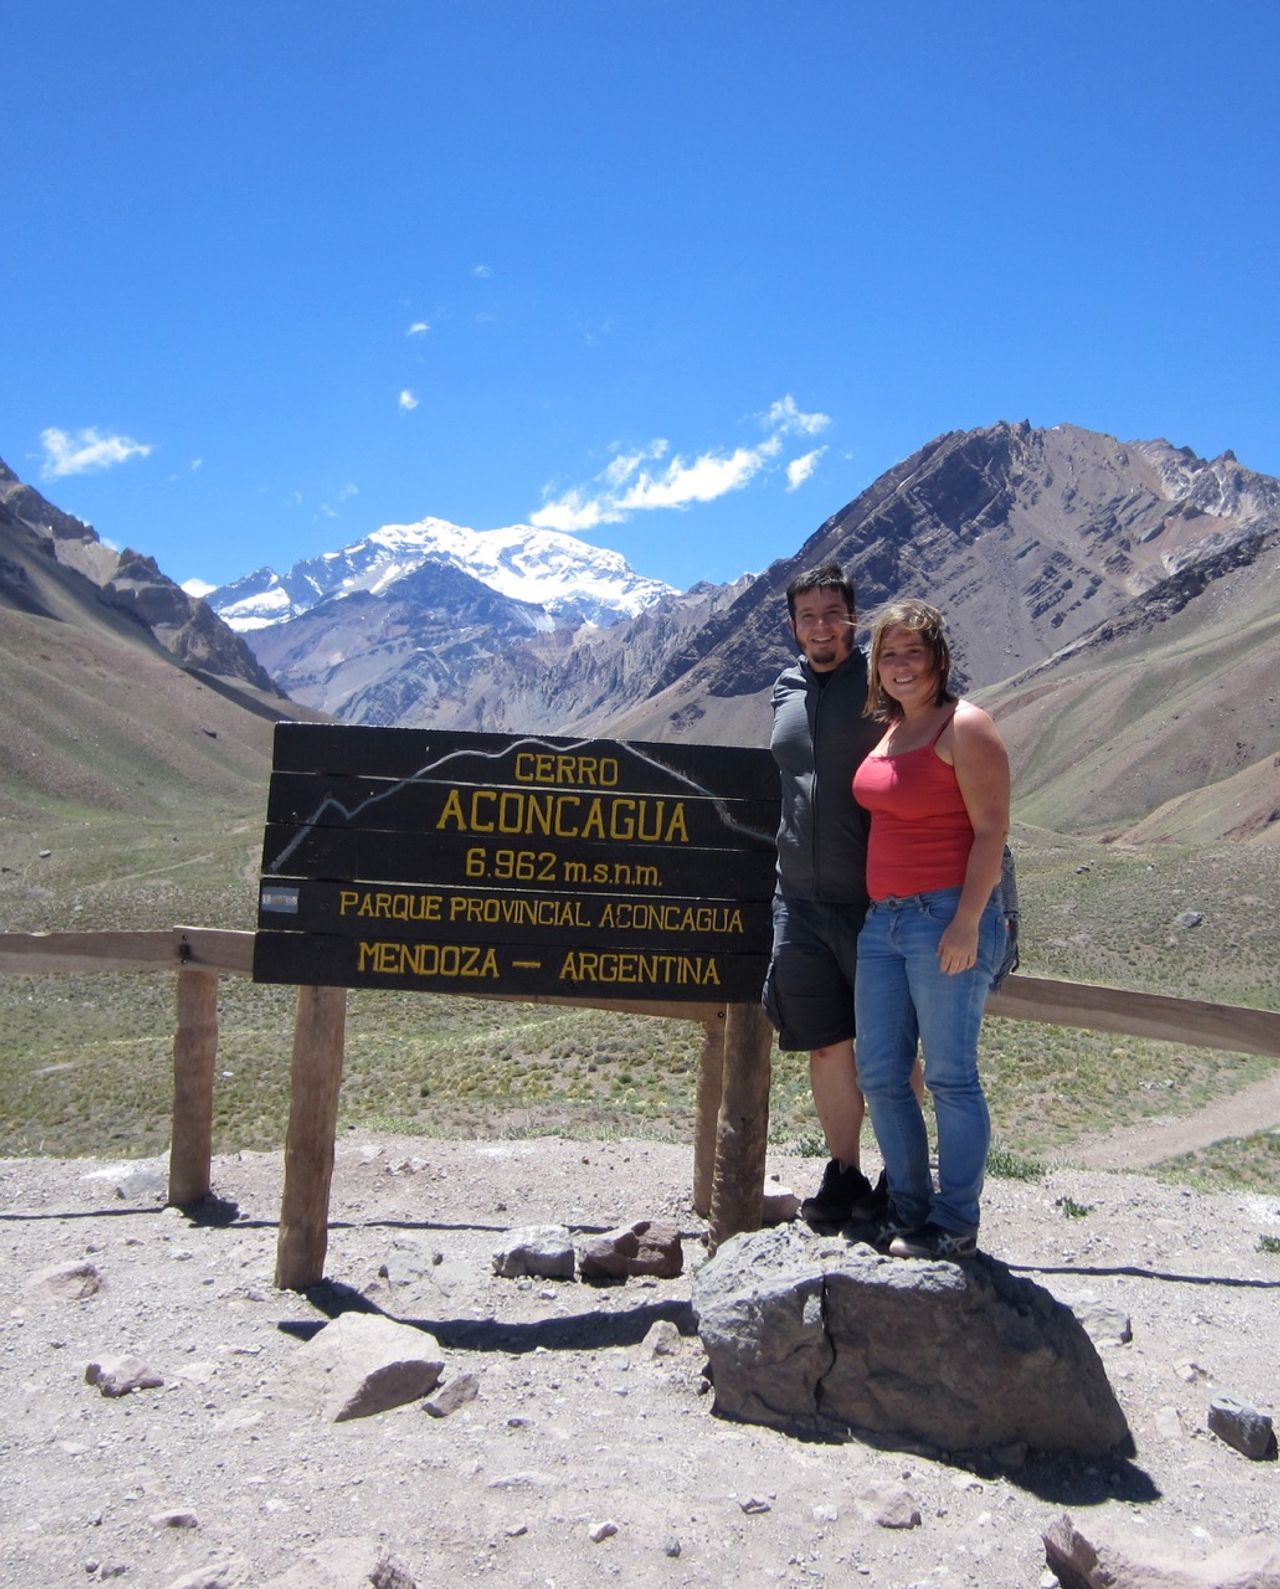 Karin and I standing in front of a sign for Cerro Aconcagua.